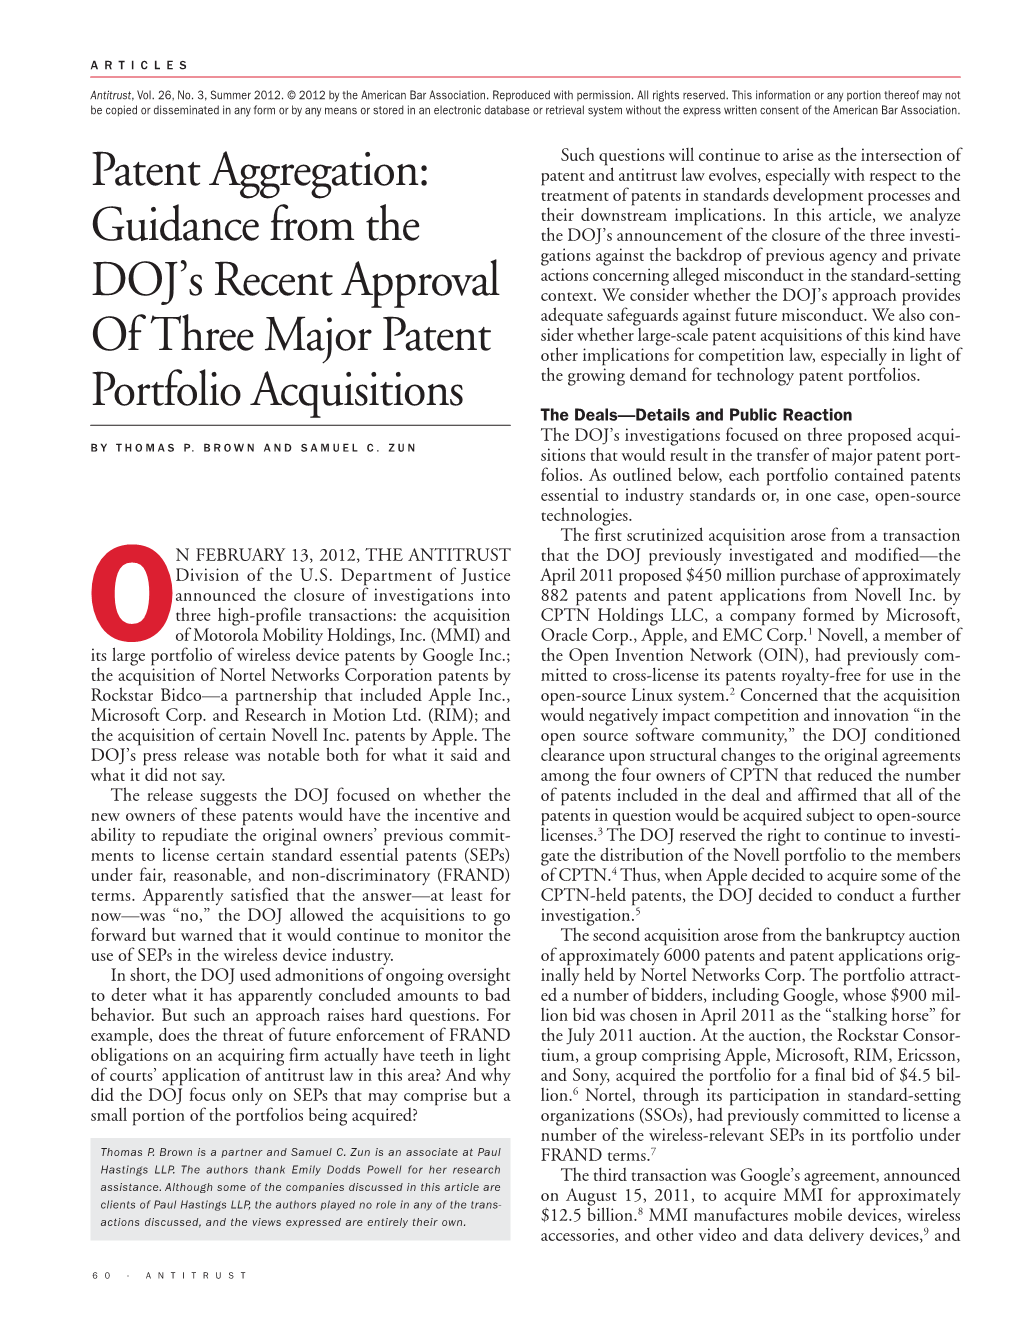 Patent Aggregation: Treatment of Patents in Standards Development Processes and Their Downstream Implications